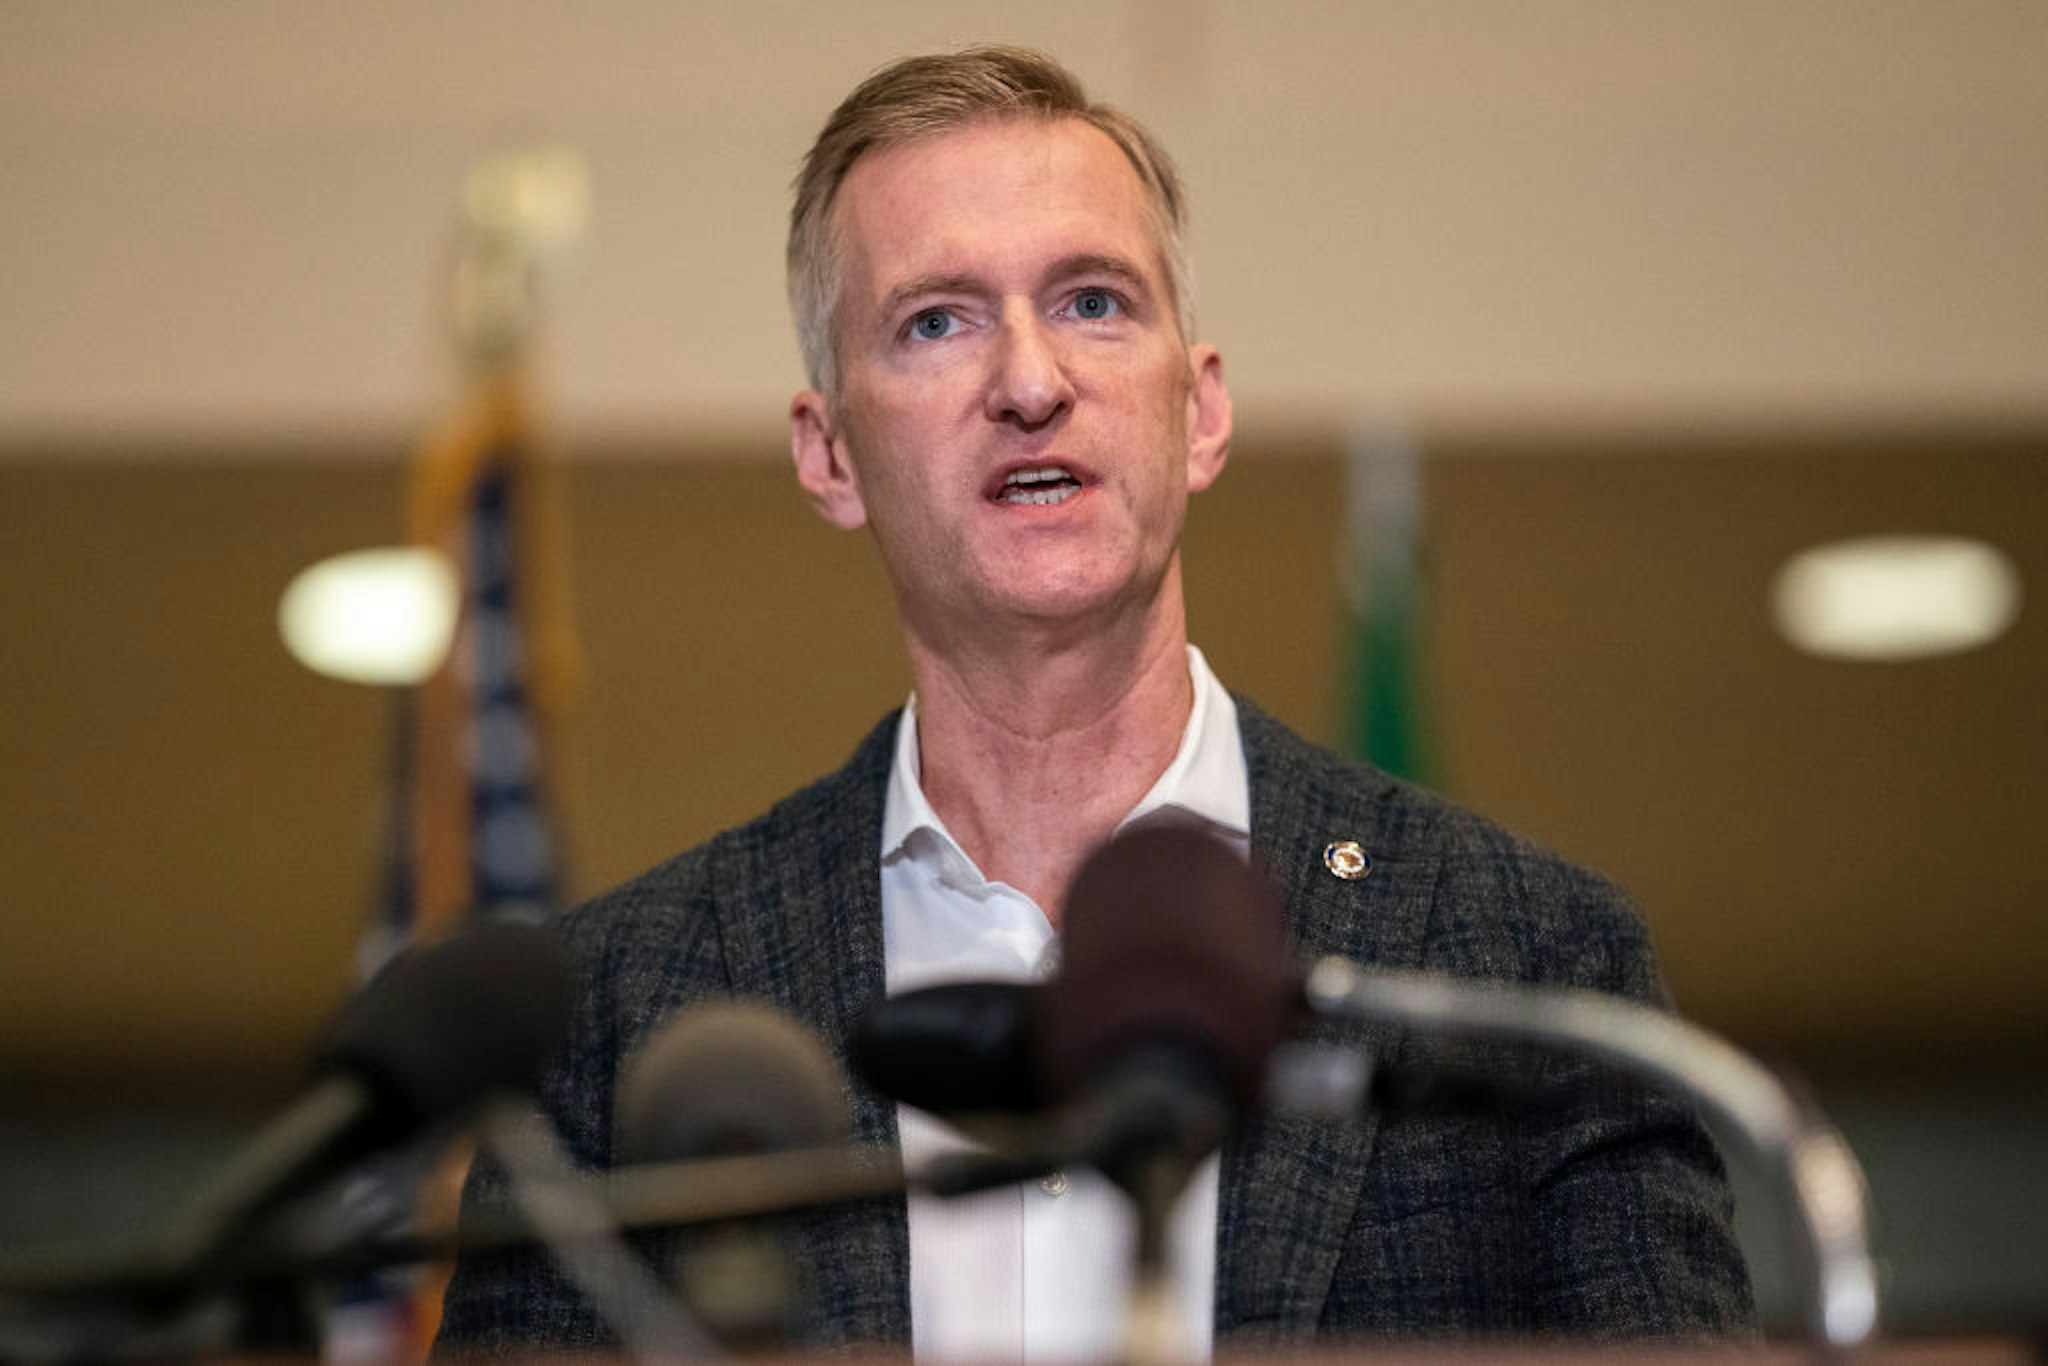 Portland Mayor Ted Wheeler speaks to the media at City Hall on August 30, 2020 in Portland, Oregon.